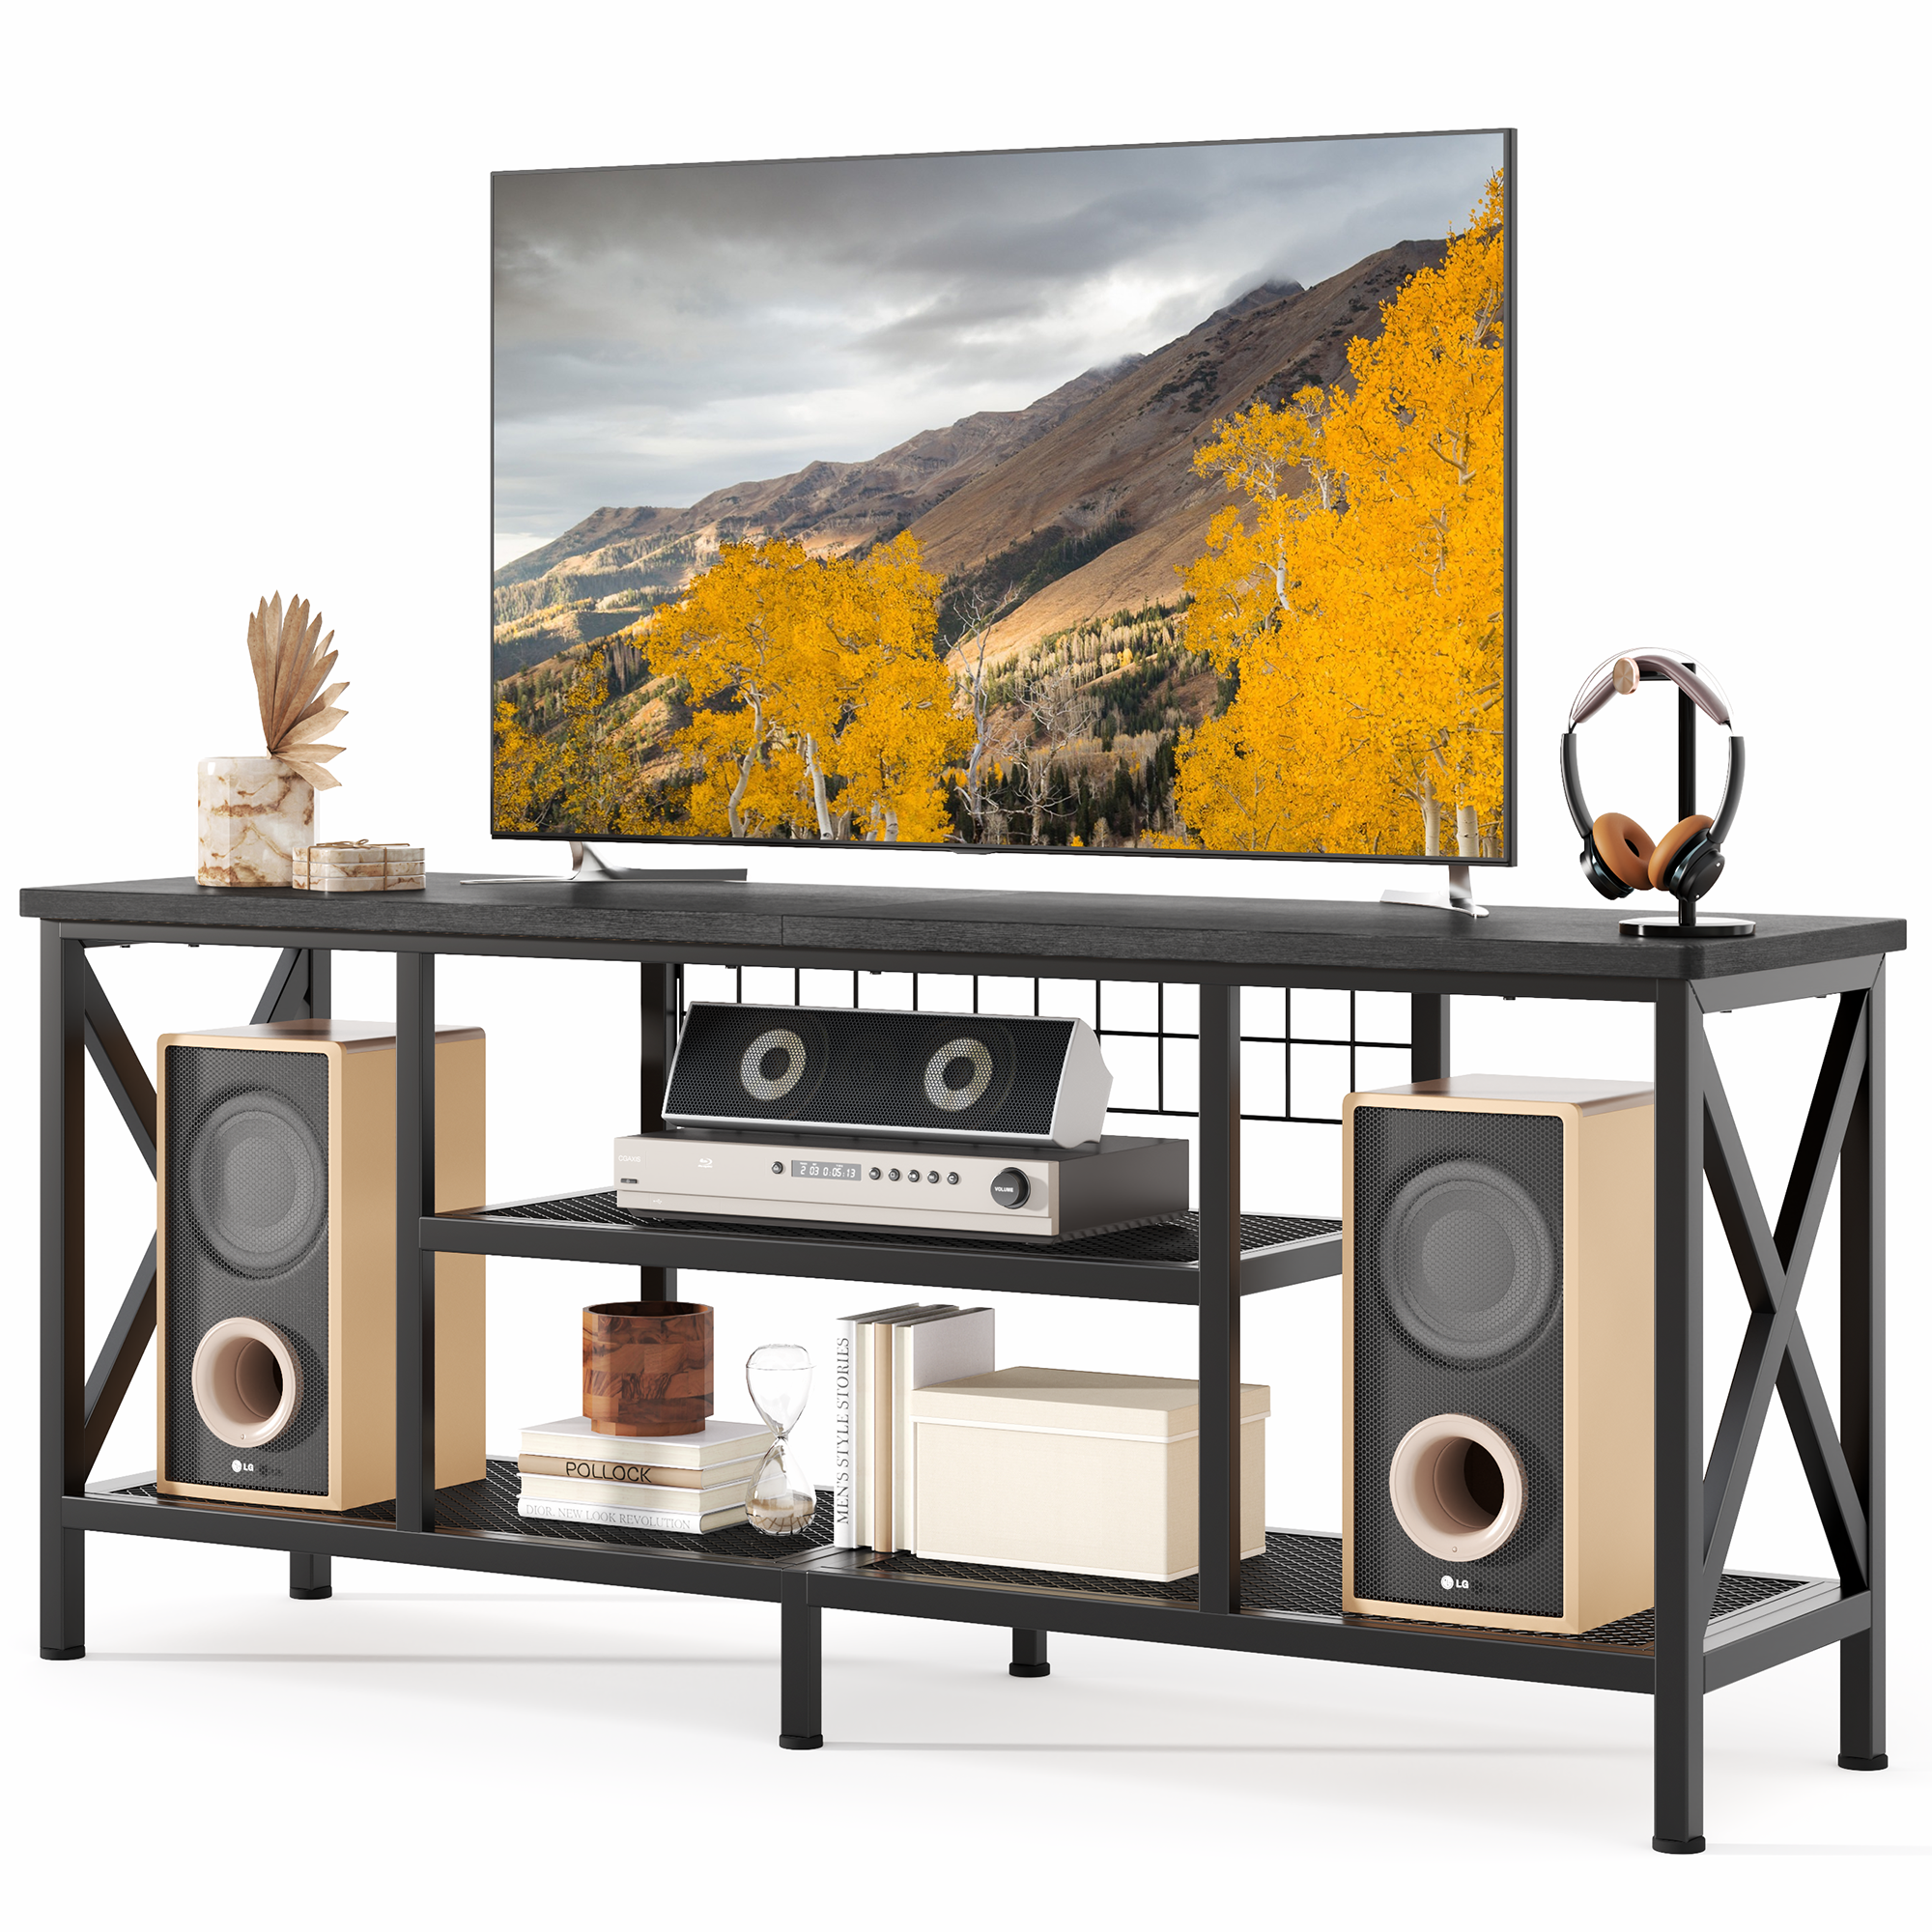 Gizoon AT20 59.8" Industrial 3-Tier Media Entertainment Center for 55-65 Inch TVs